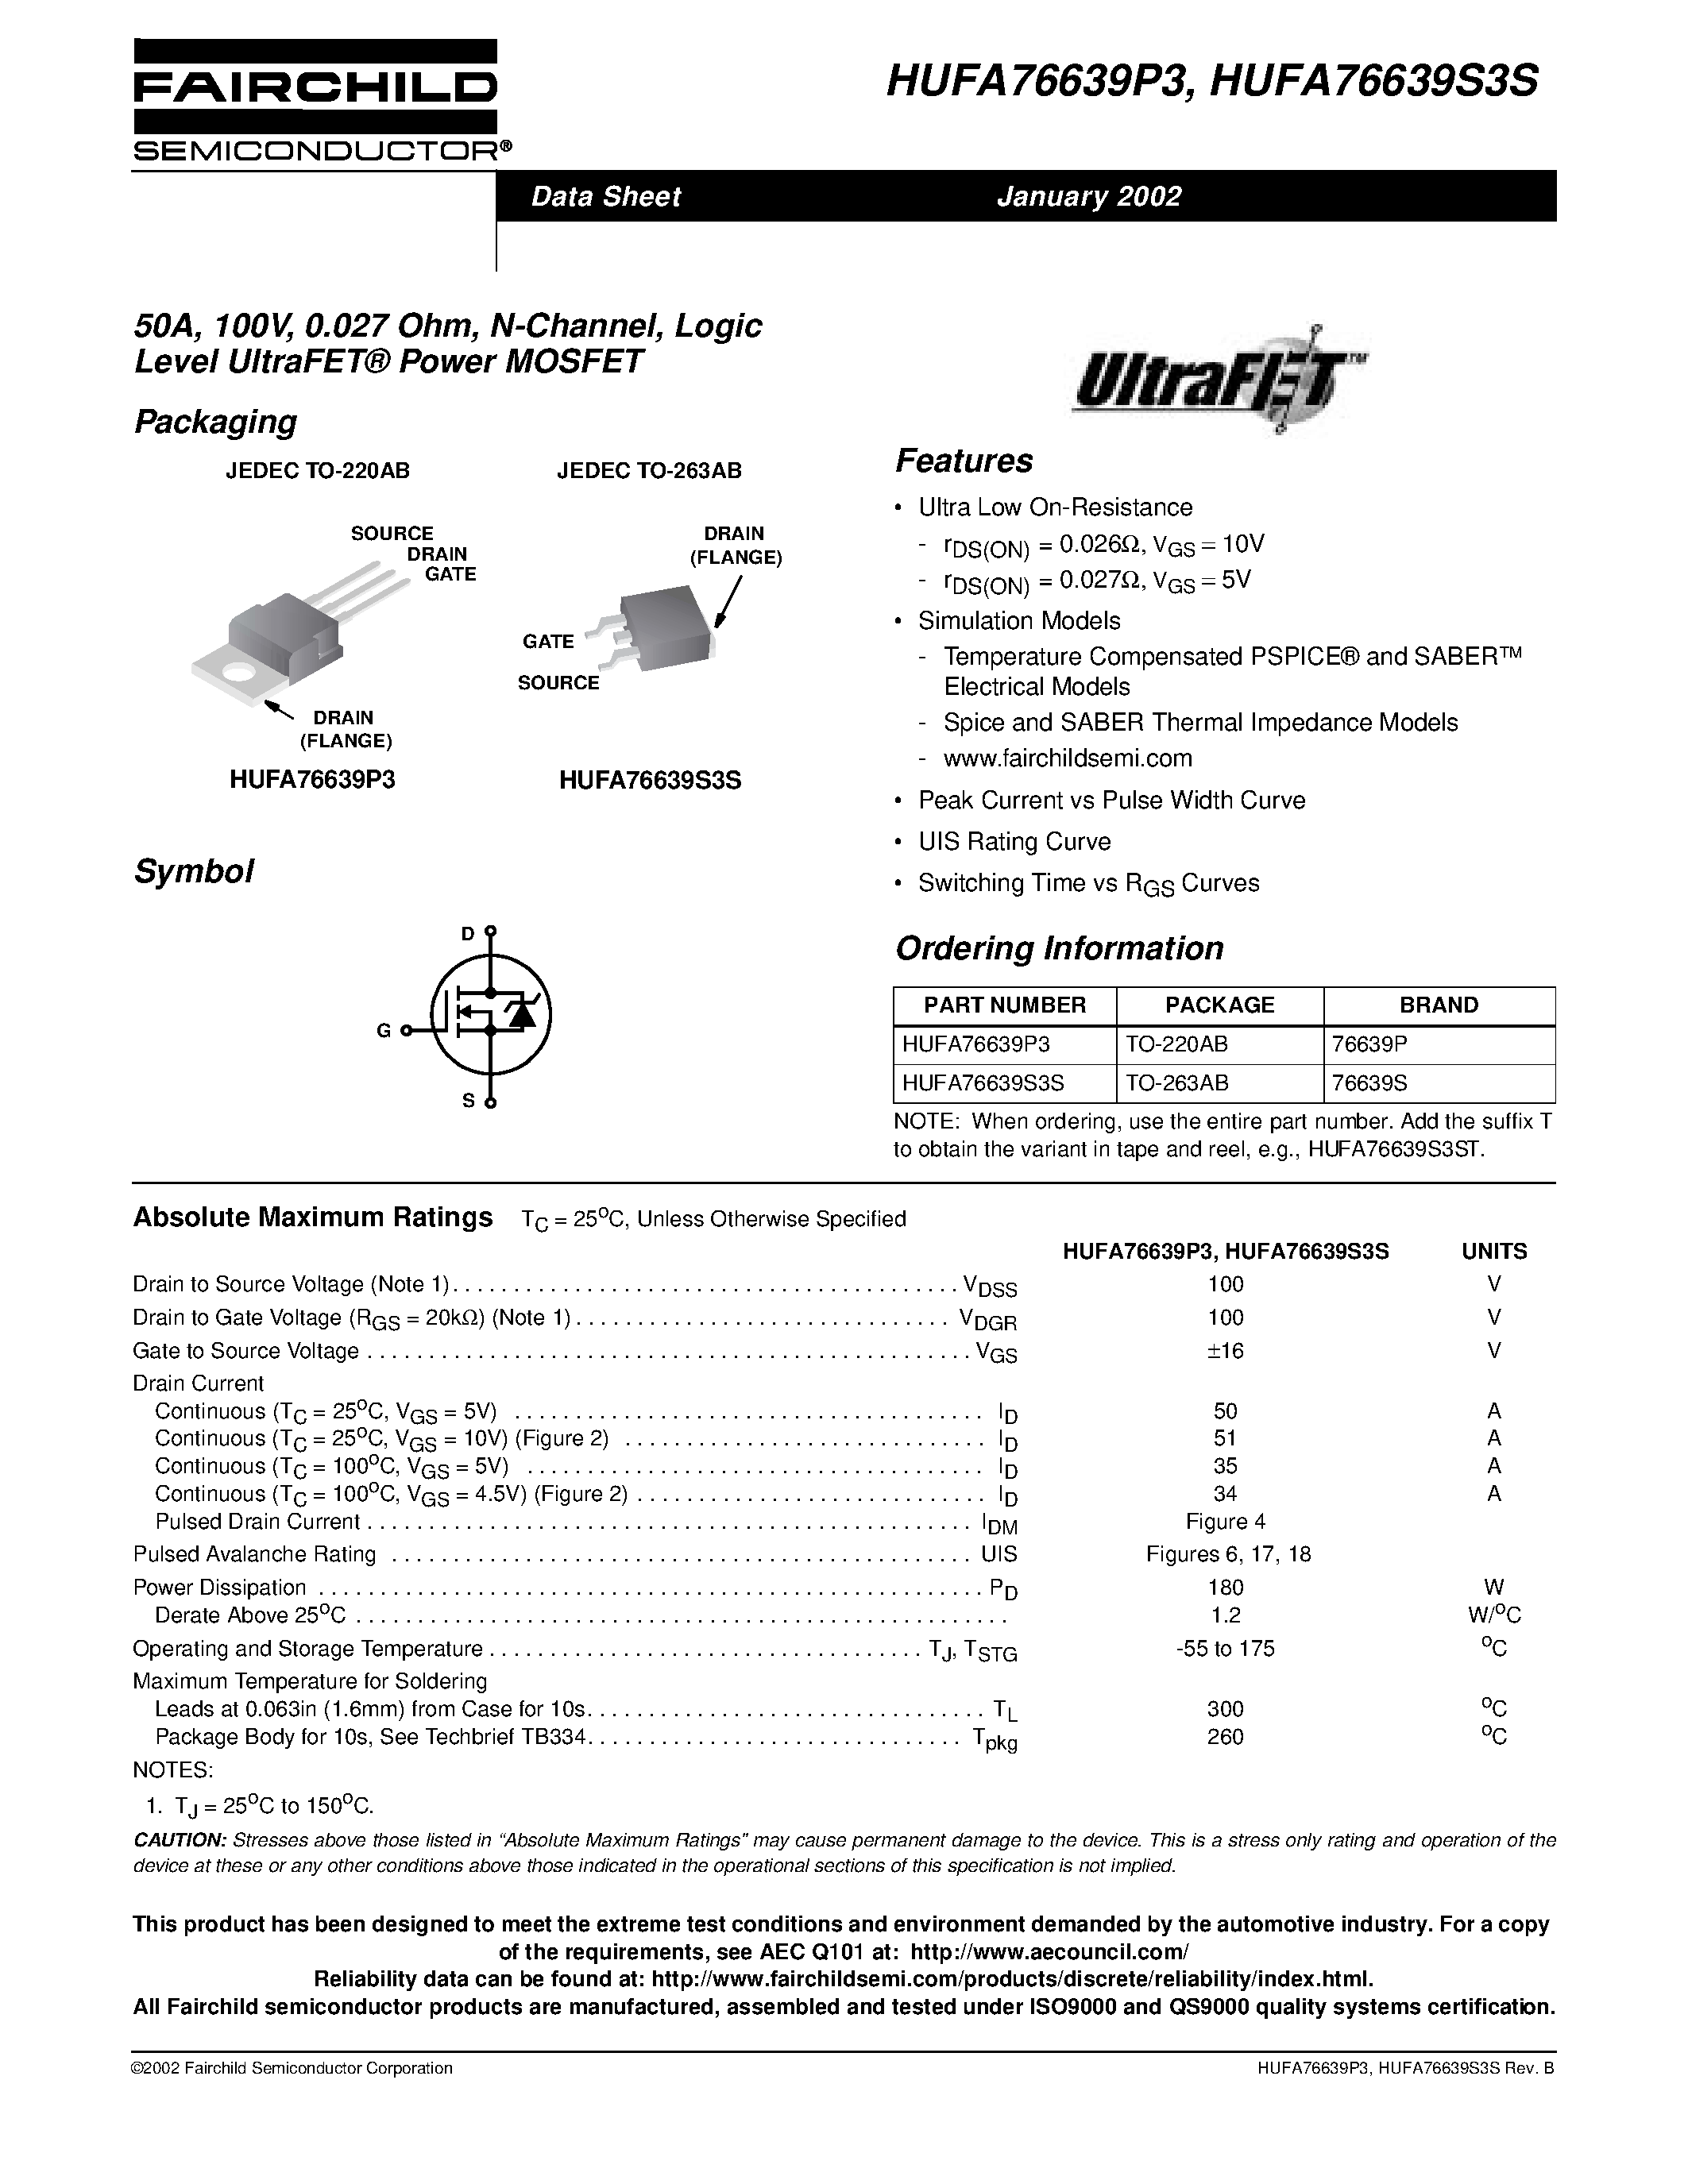 Datasheet HUFA76639P3 - 50A/ 100V/ 0.027 Ohm/ N-Channel/ Logic Level UltraFET Power MOSFET page 1